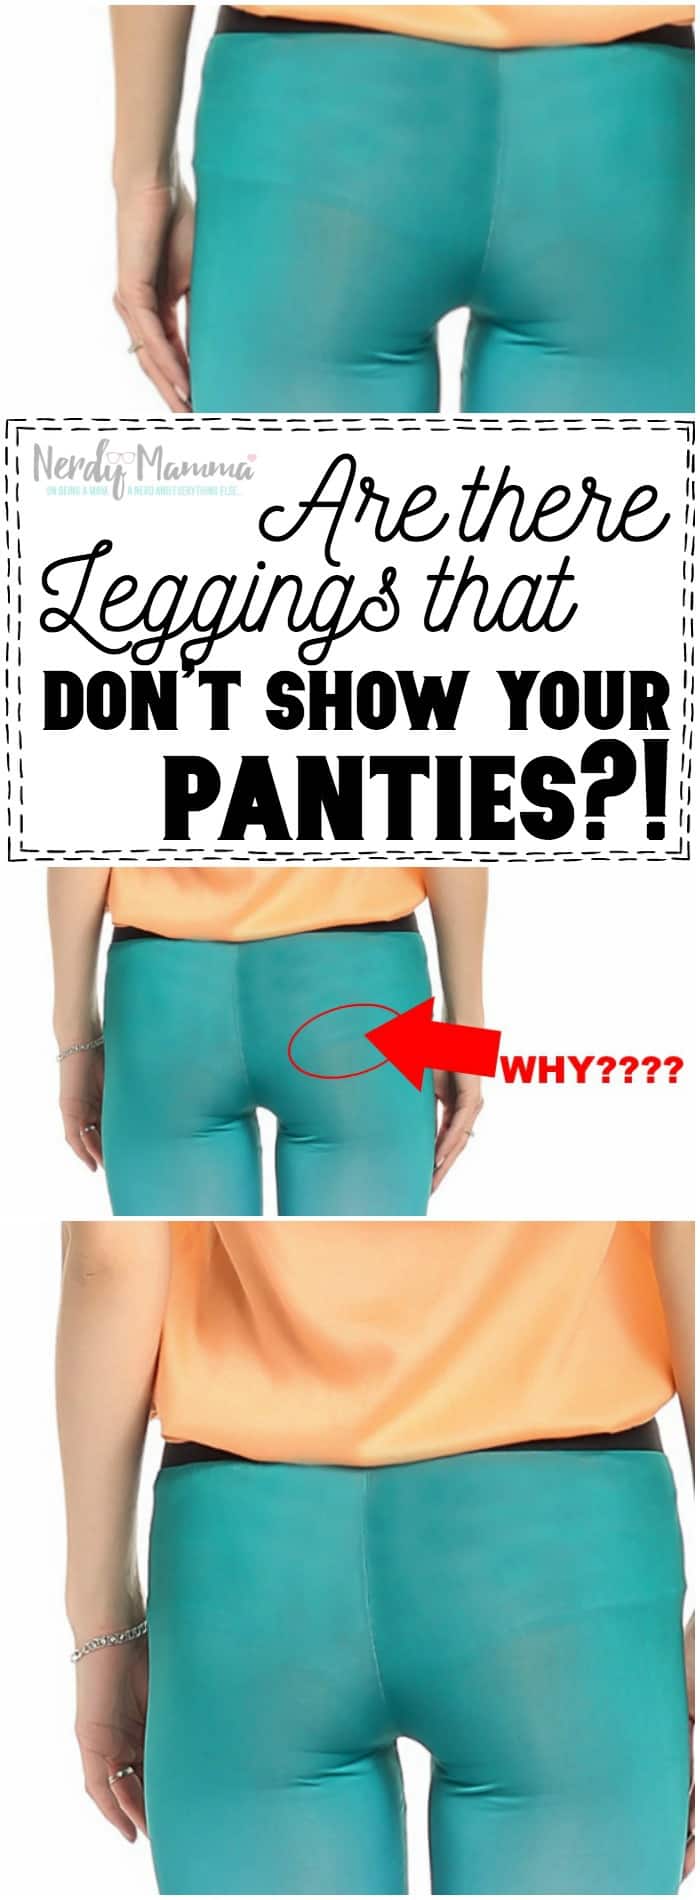 The answer to the ultimate question: Are there leggings that don't show your panties? LOL!